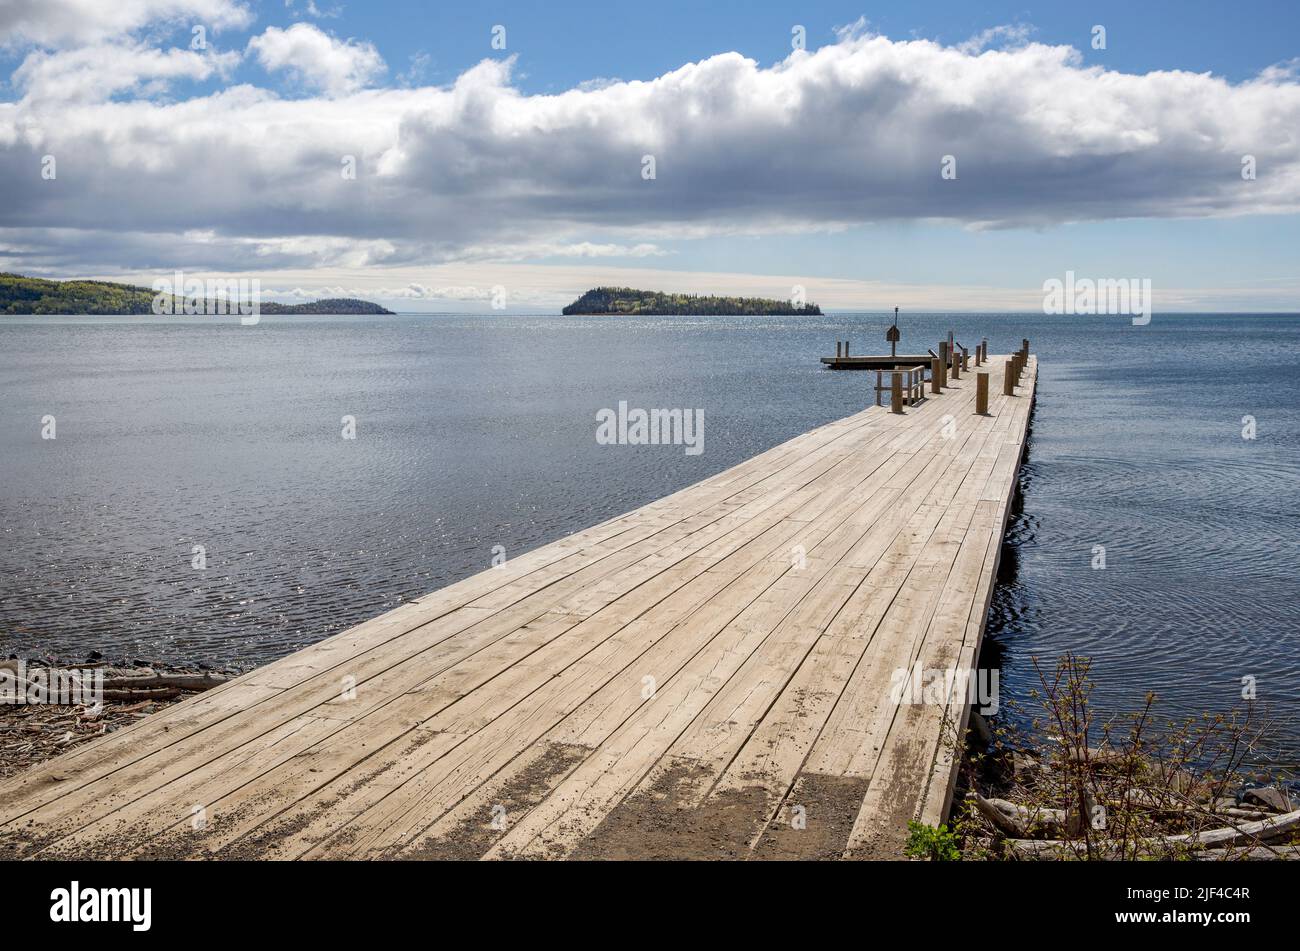 Boat landing, wharf, and dock at the Grand Portage National Monument historic site on the North Shore of Lake Superior, Minnesota, United States Stock Photo